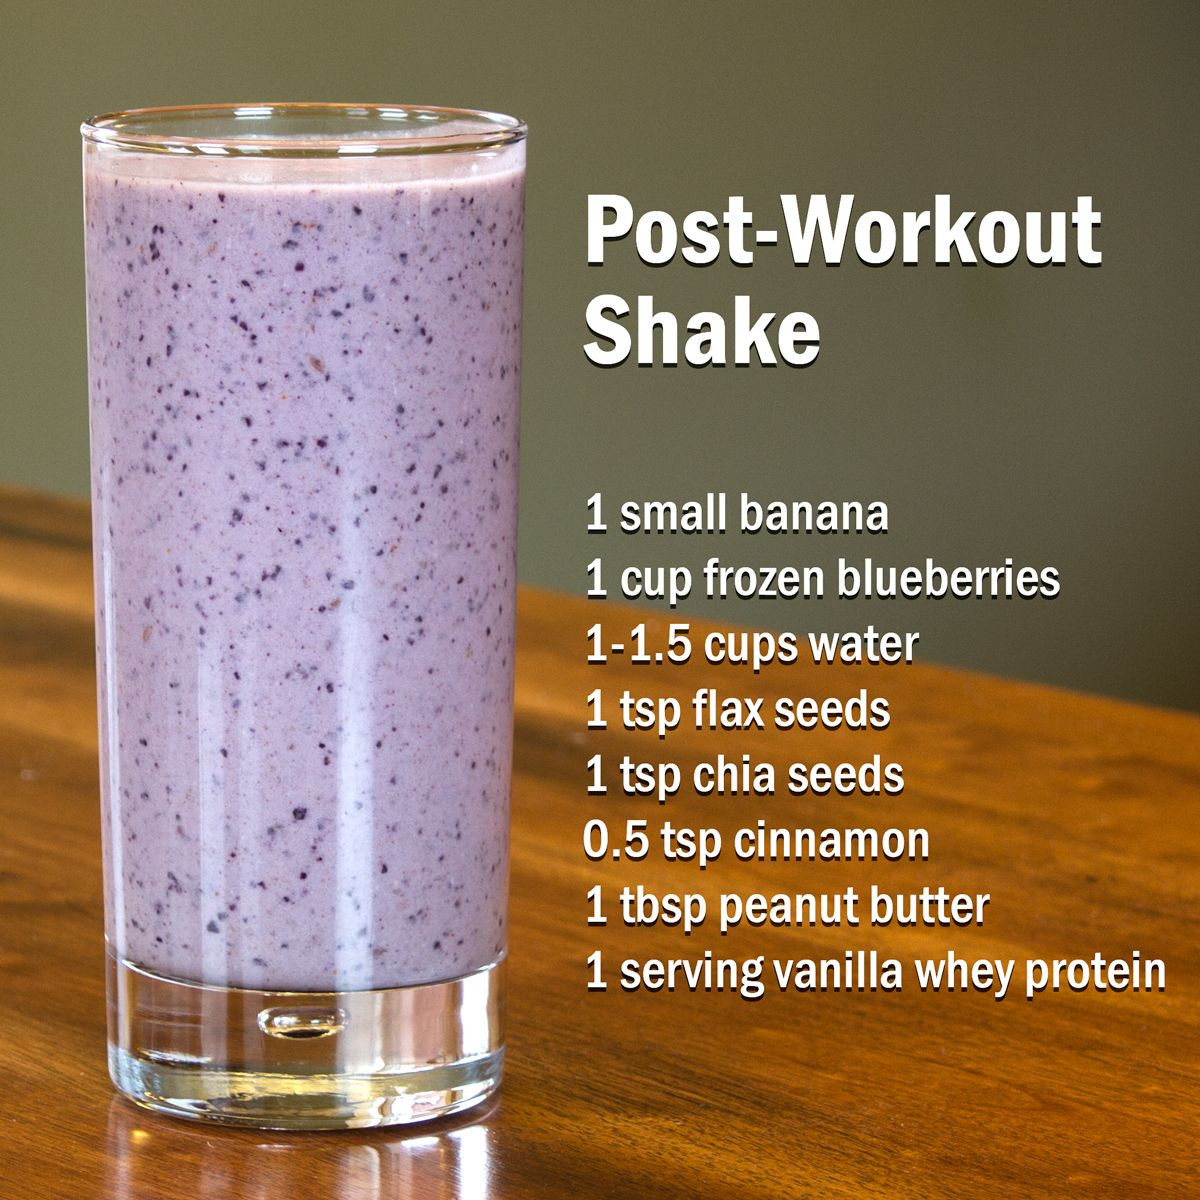 Weight Loss Smoothie Recipes With Whey Protein
 Image result for PROTEIN POWDER SMOOTHIE RECIPES